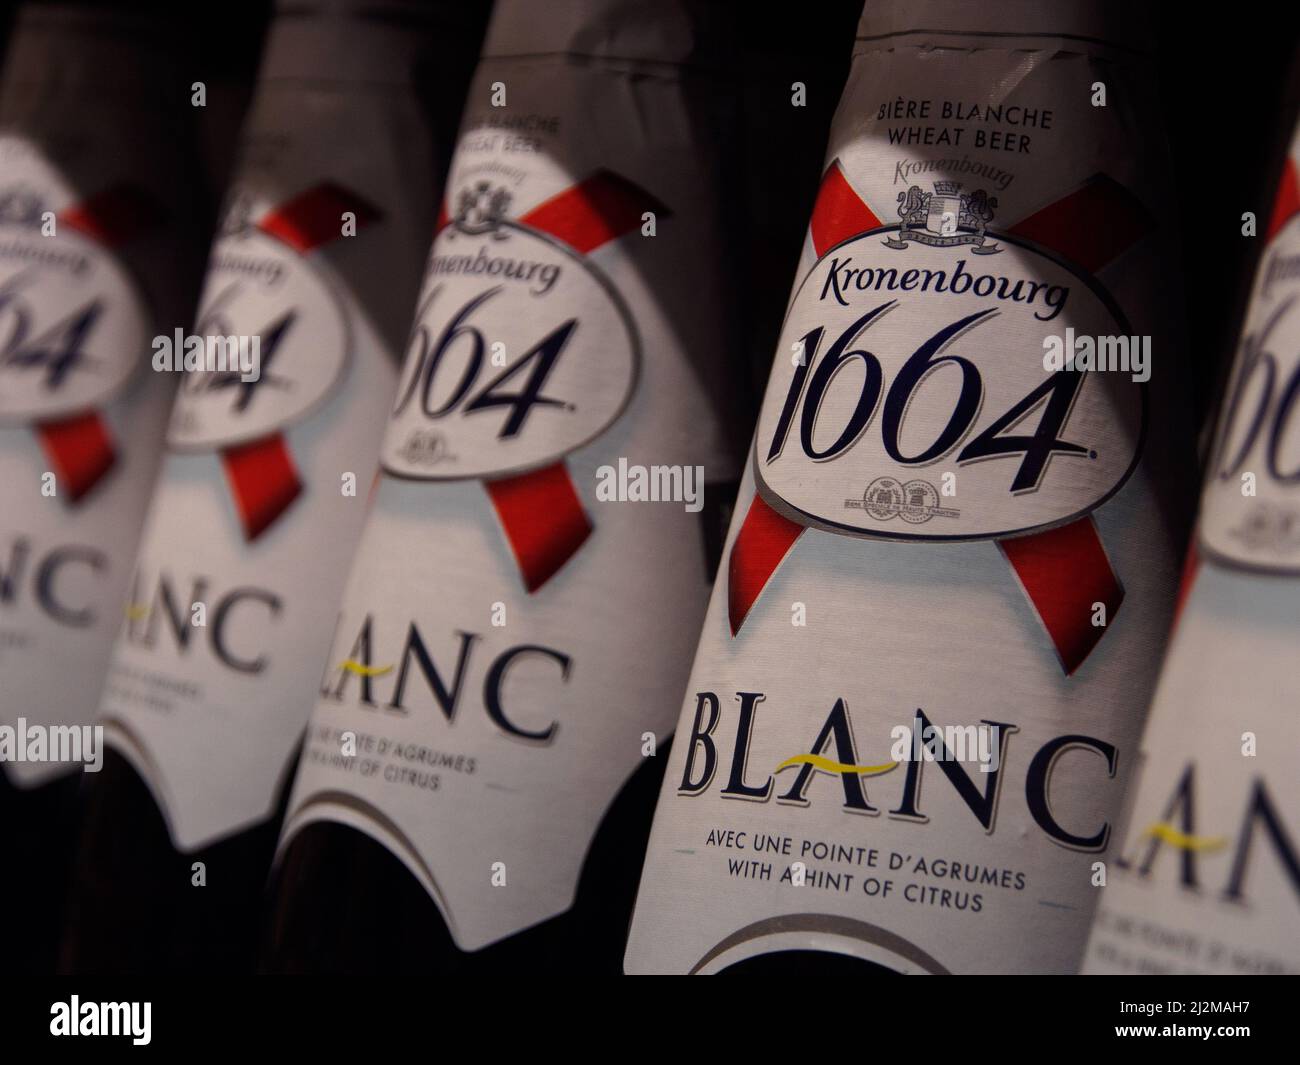 The Kronenbourg 1664 logo on beer bottles. It was reported that Carlsberg Group is leaving the Russian market and plans to transfer the local business to a new investor. The Danish brewing company 'Carlsberg' is represented in Russia by the brands 'Carlsberg', 'Kronenbourg', 'Holsten' and 'Tuborg' Stock Photo